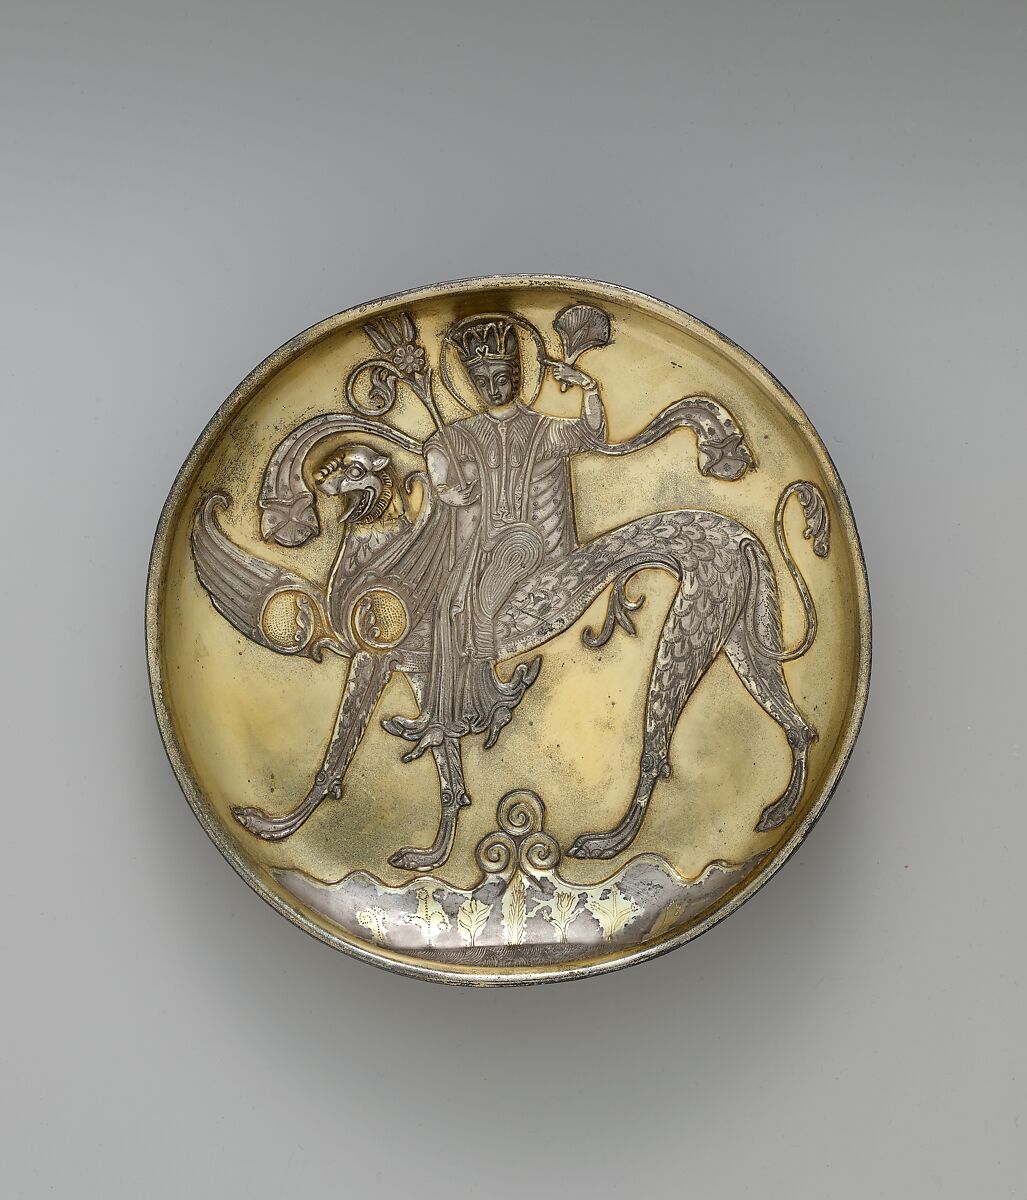 Plate Depicting a Female Figure Riding a Fantastic Winged Beast, Silver; gilded, chased, and engraved, with applied elements 